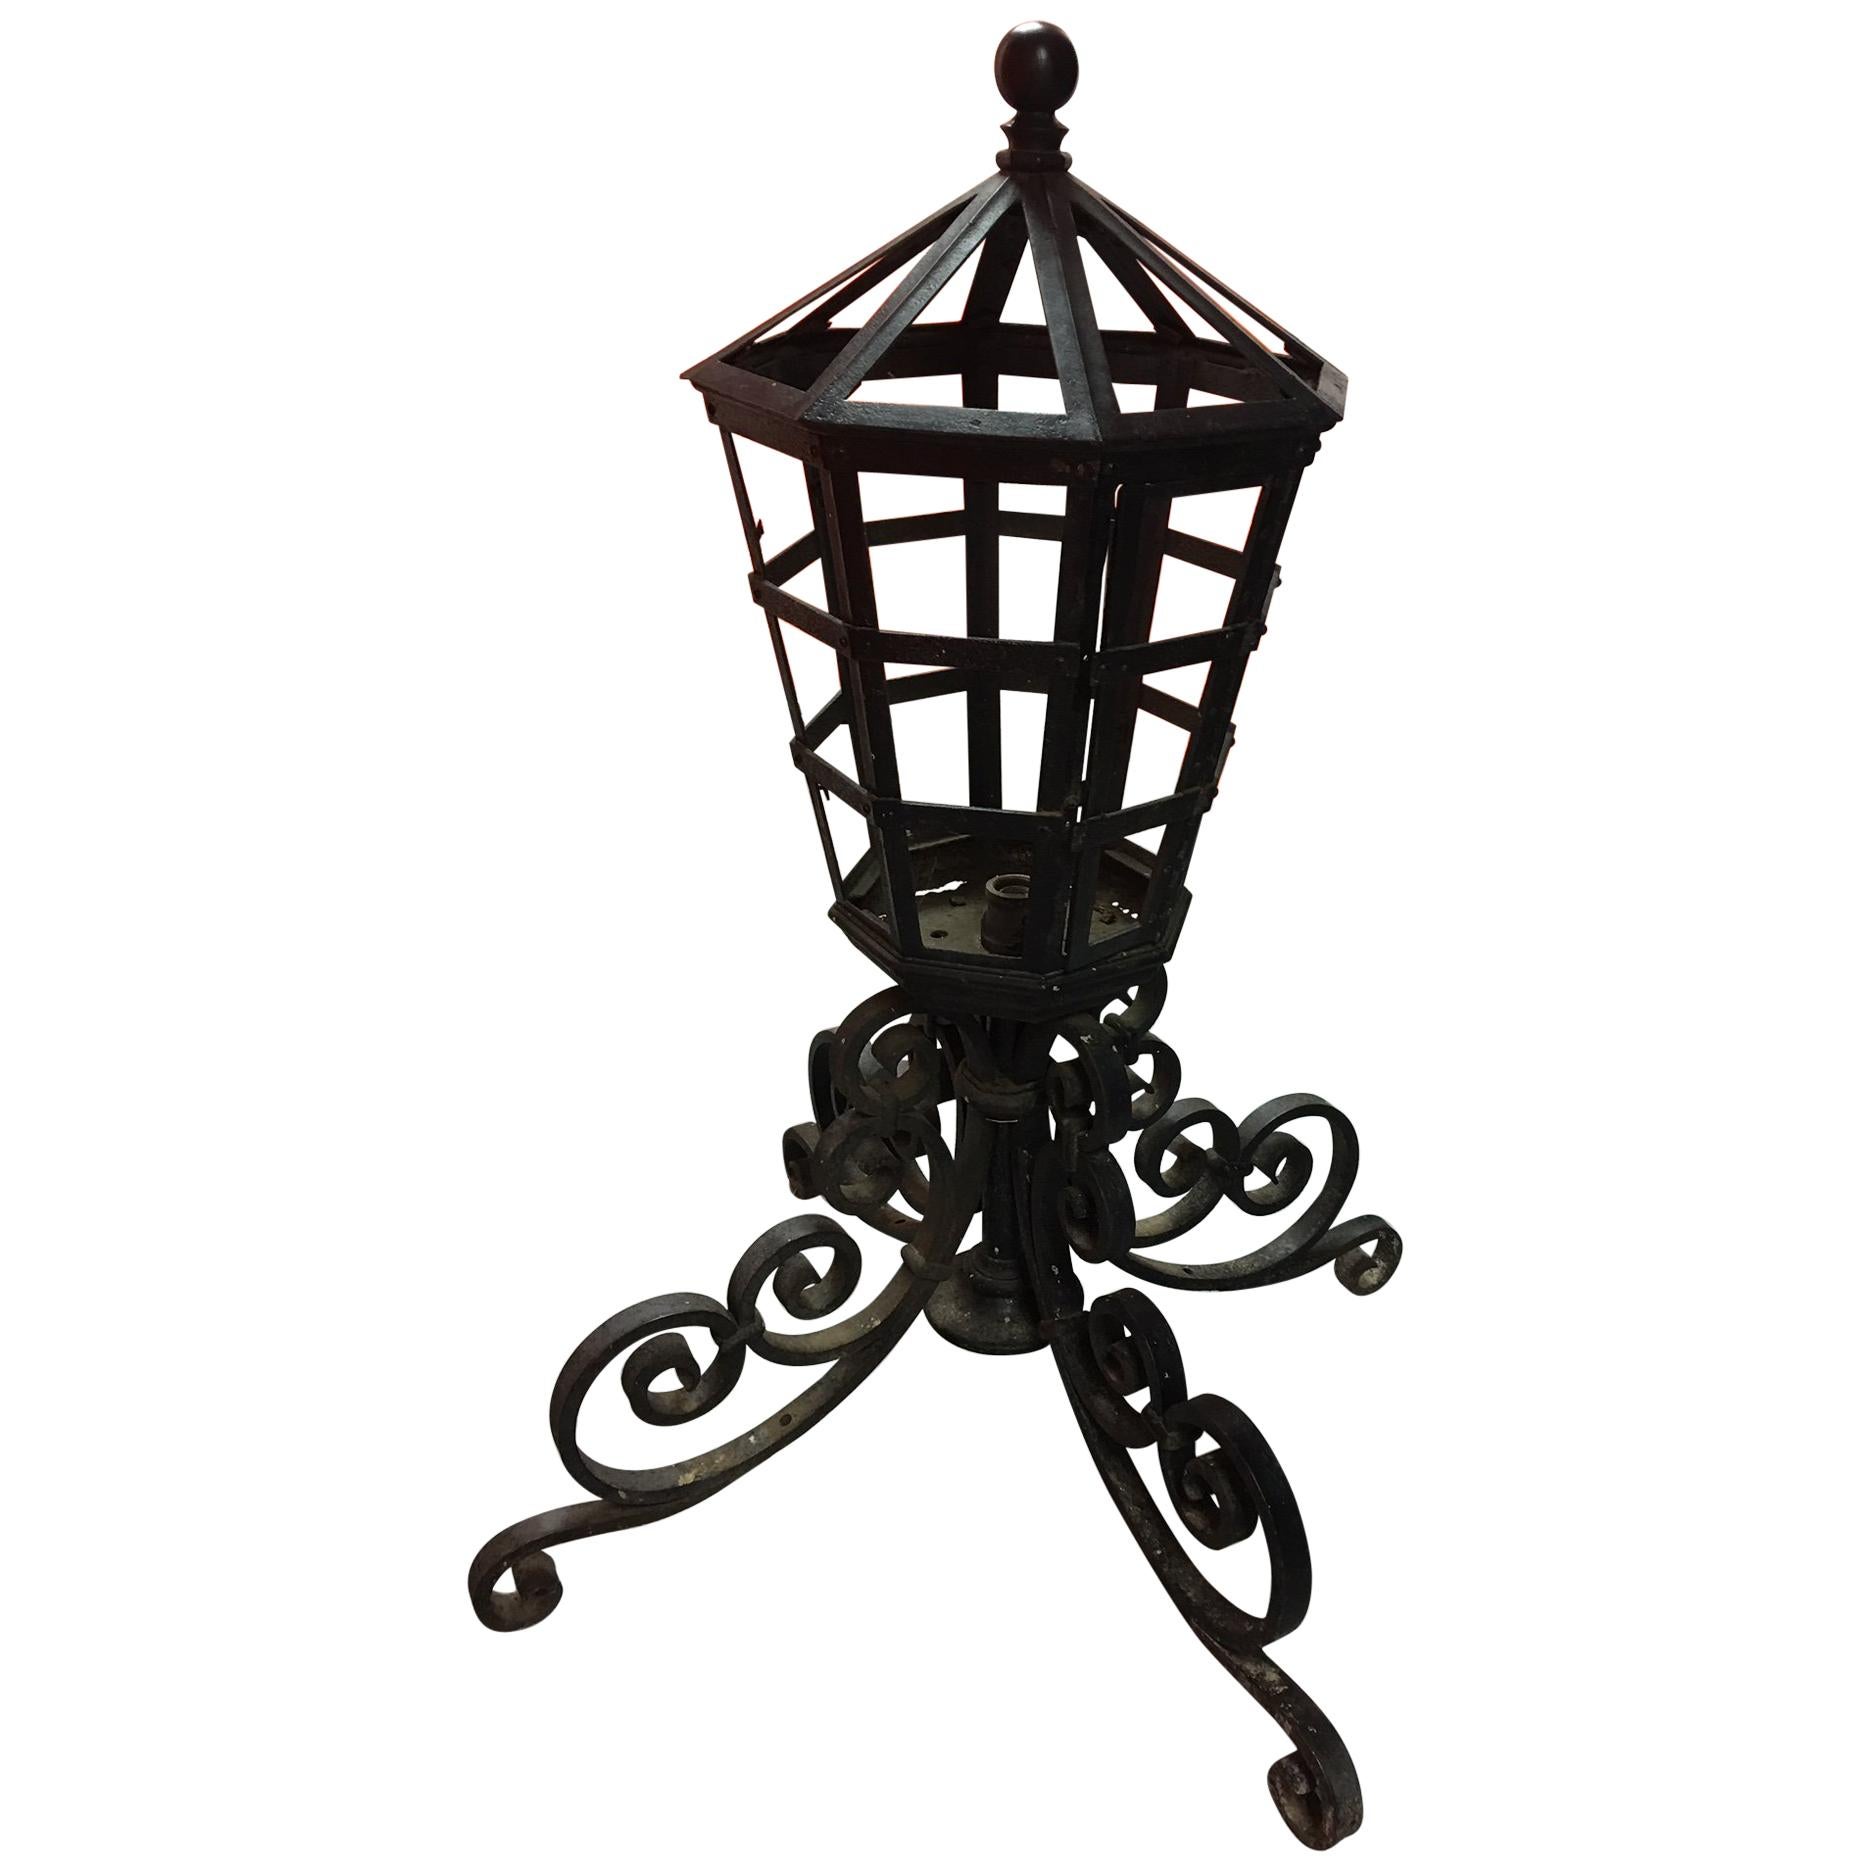 Pair of Pier Mount Iron Lights Adorned with Scrolls on Four Legs, 20th Century